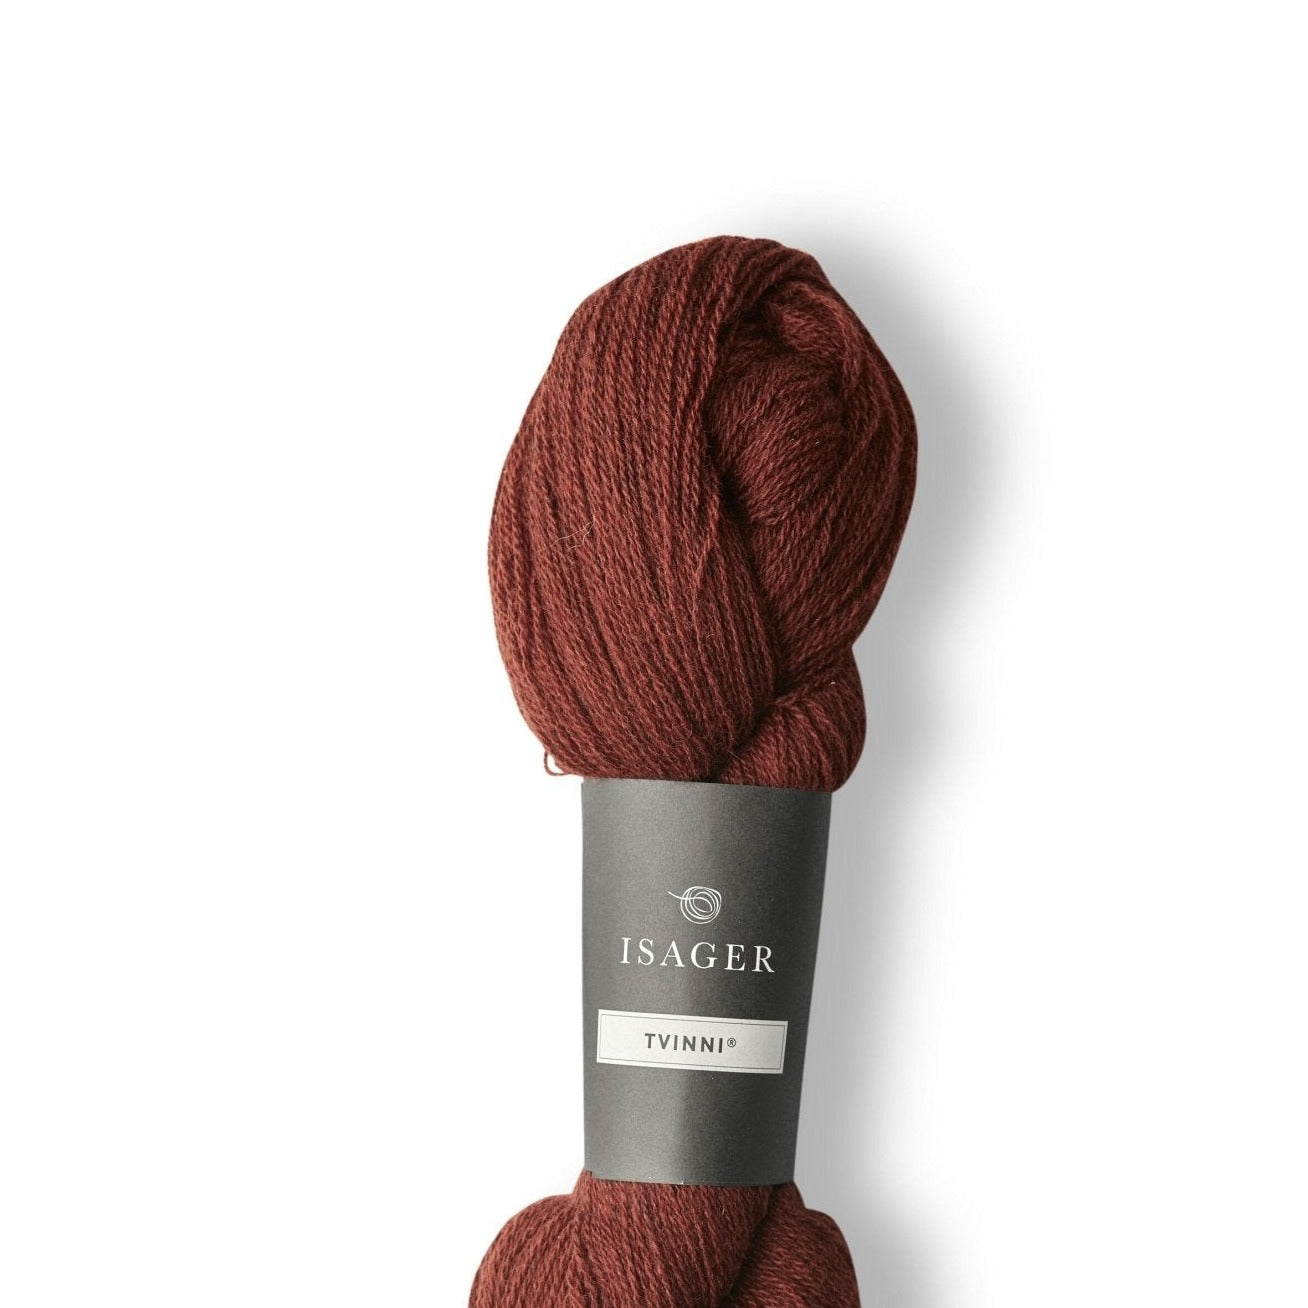 Isager Tvinni - 33s - 4 Ply - Isager - The Little Yarn Store